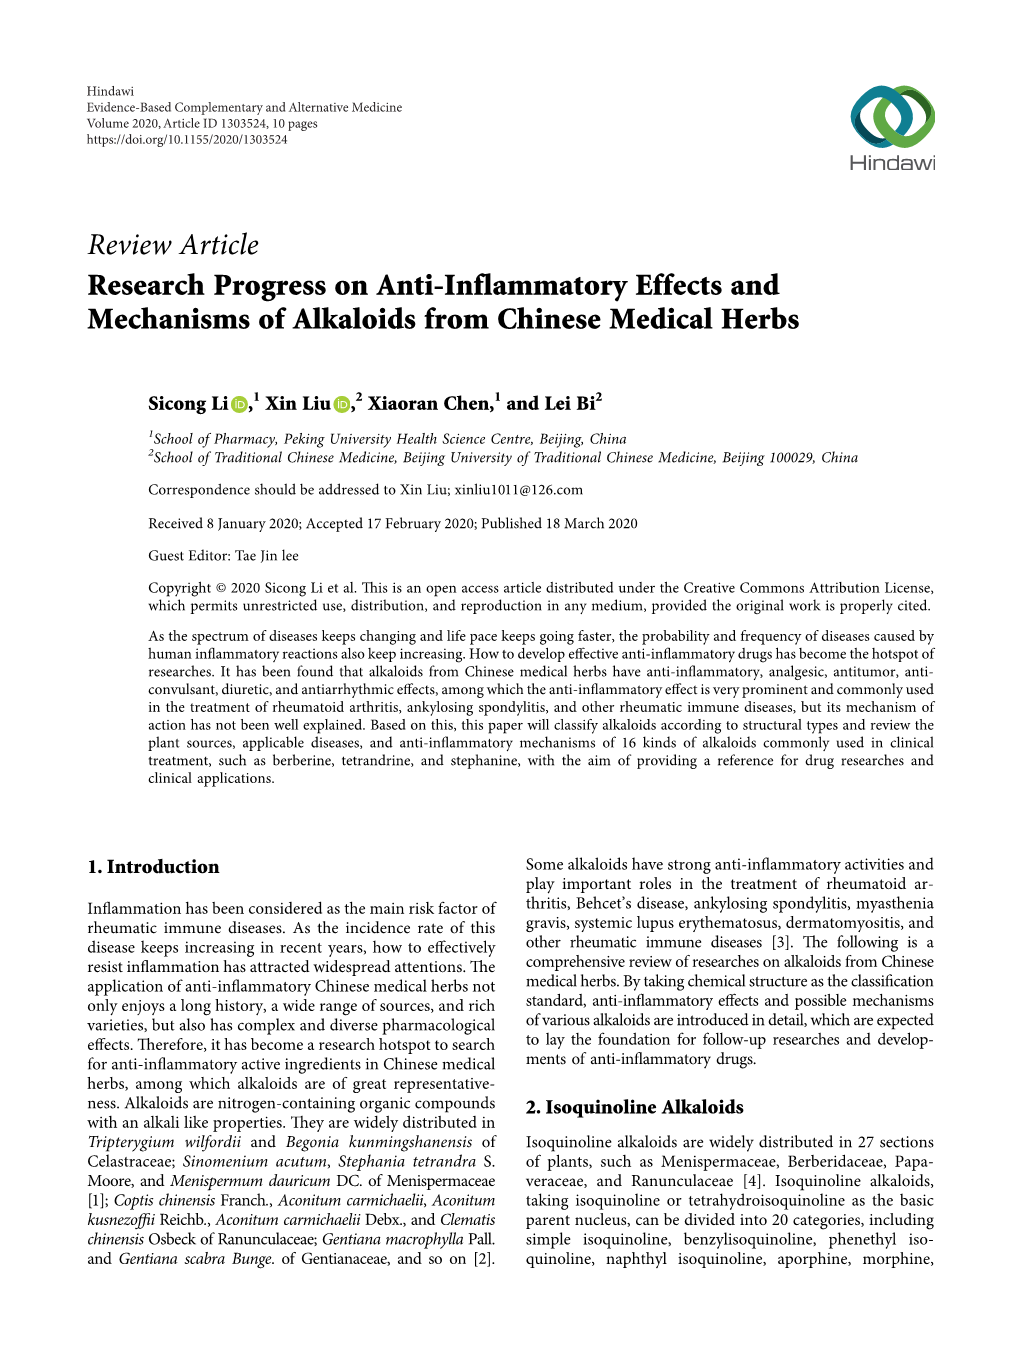 Research Progress on Anti-Inflammatory Effects and Mechanisms of Alkaloids from Chinese Medical Herbs